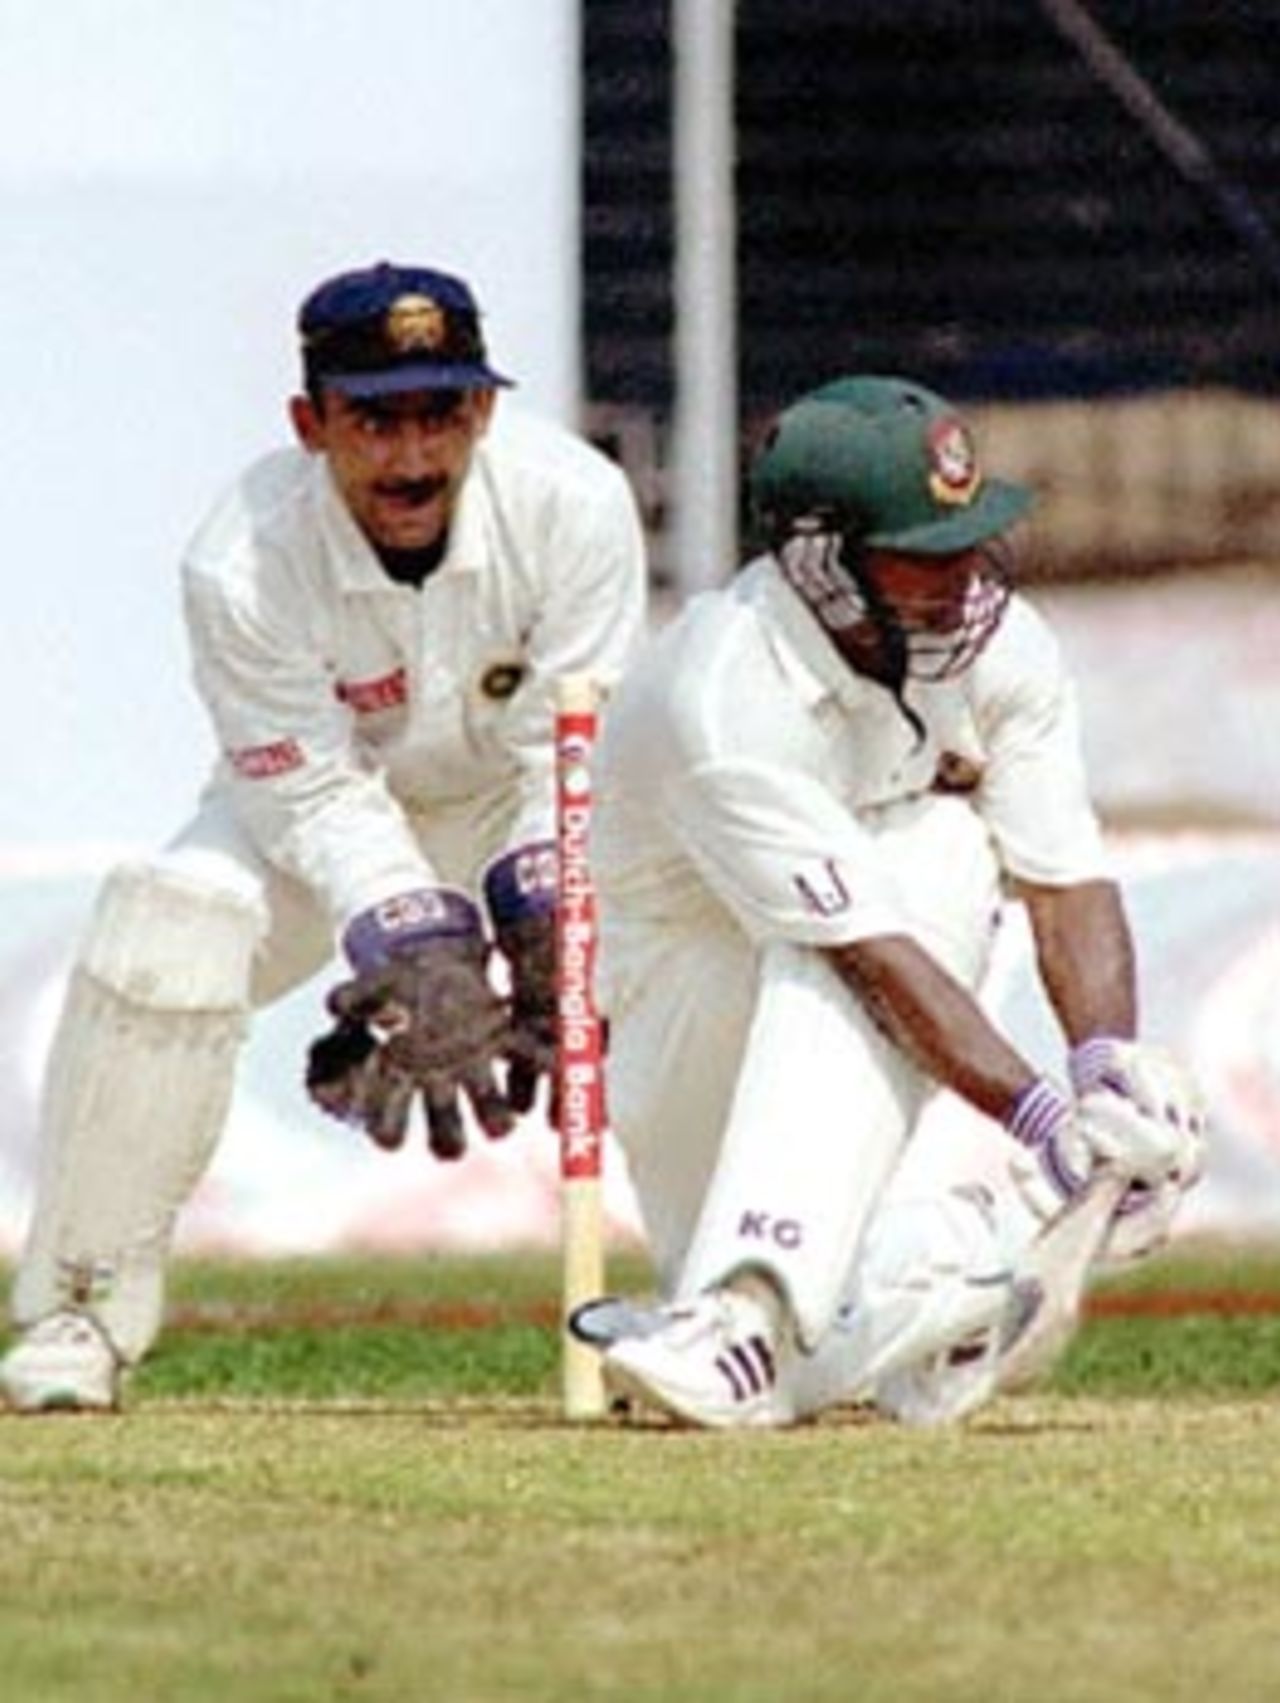 Bangladeshi bastman Aminul Islam (R) hits a ball off Indian spiner Murli Kartick (not in picture) for one run to make a century 11 November 2000 at the Bangabandhu National Stadium on the second day of Bangladesh's inaugural Test match against India. Aminul created history by becoming the third man to score a century in an inaugural Test match. Bangladesh scored 302 for six at lunch on the day in their debut match.